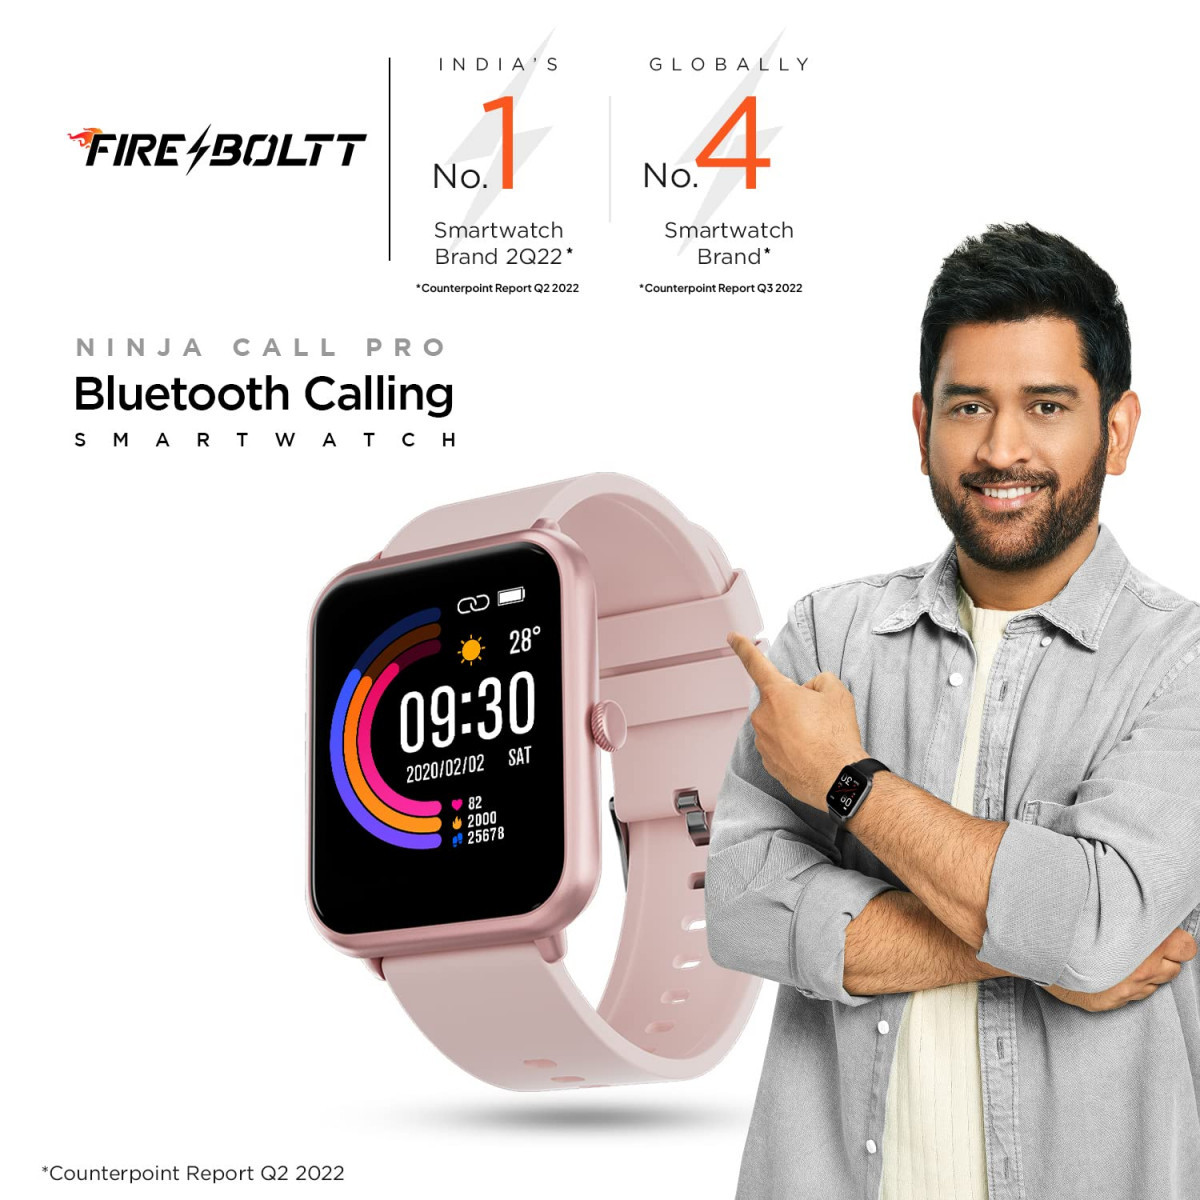 Fire-Boltt Ninja Call Pro Smart Watch Dual Chip Bluetooth Calling 169 Display AI Voice Assistance with 100 Sports Modes with SpO2  Heart Rate Monitoring